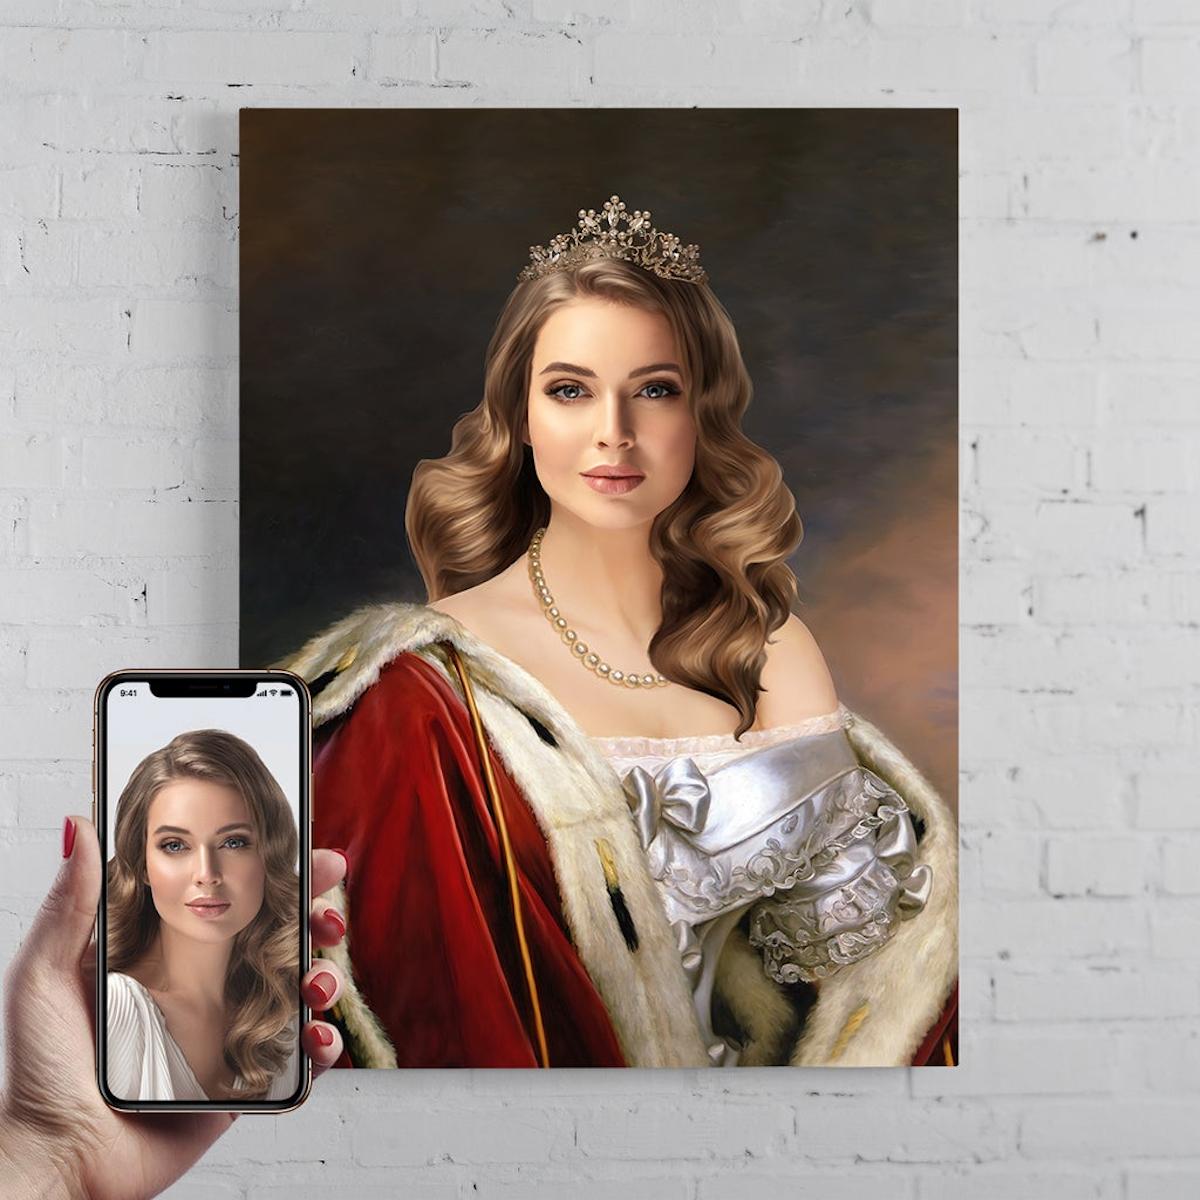 Turn Me Royal Portrait. (Courtesy of retailers)